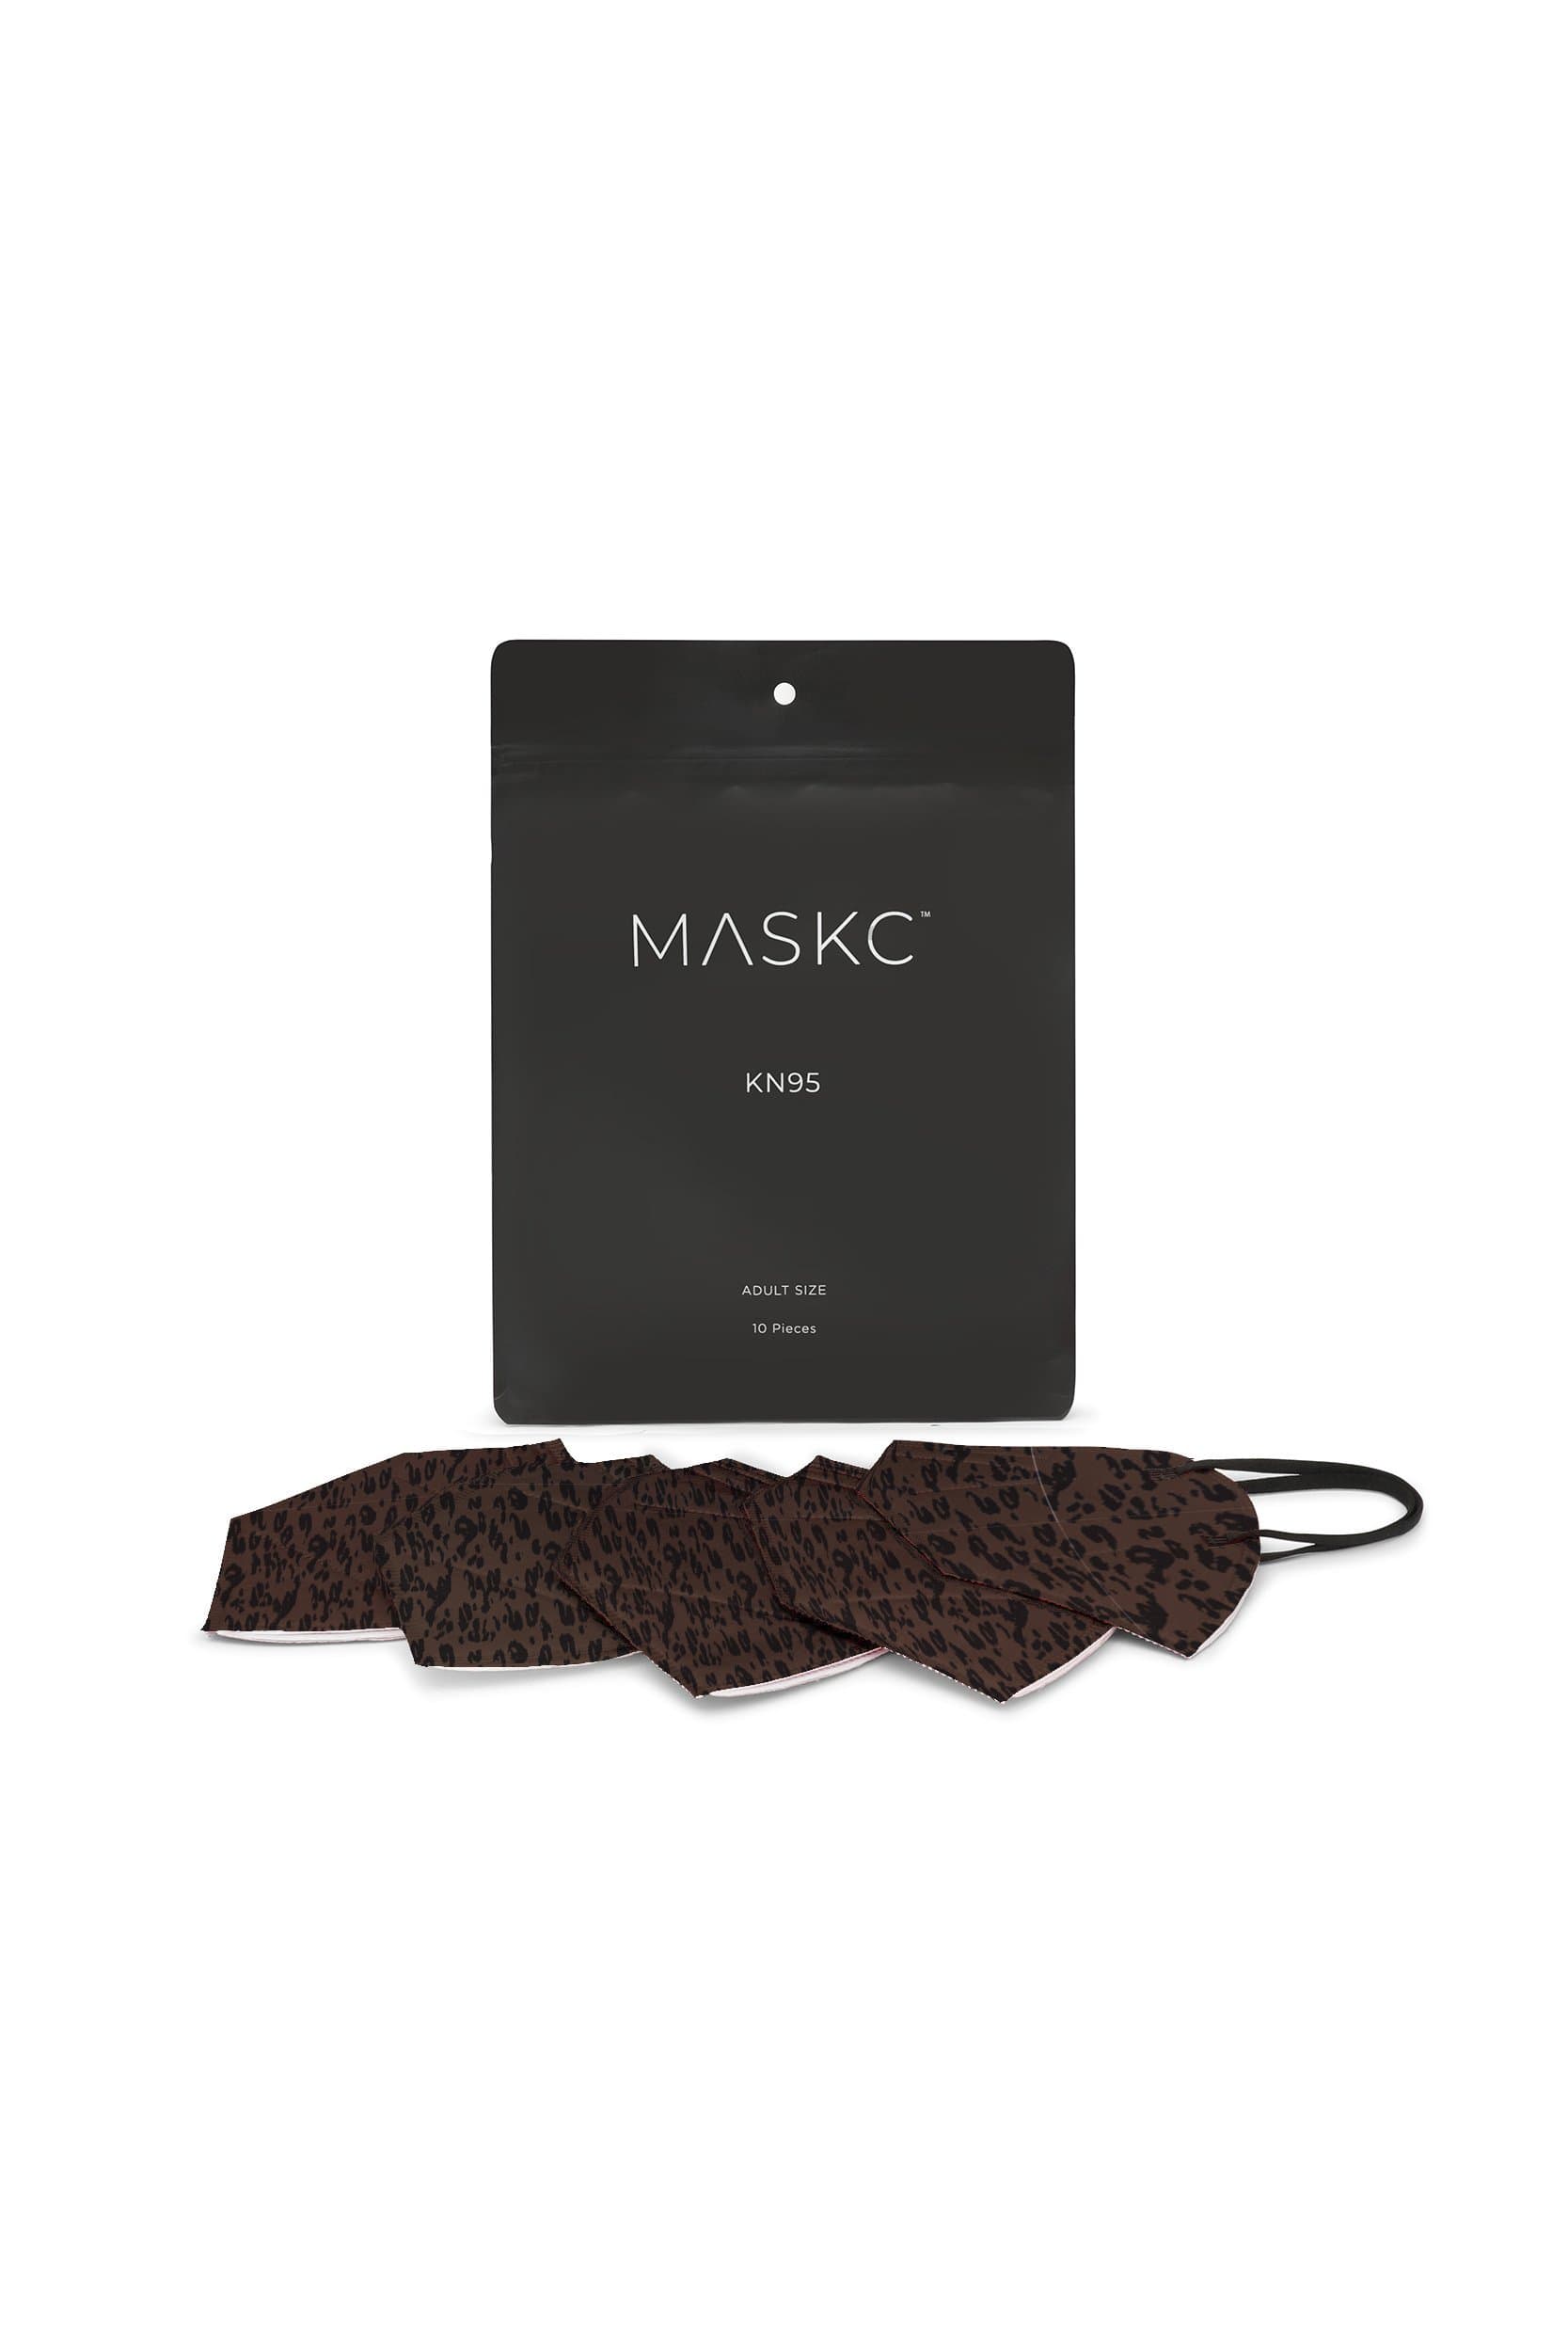 10 Pack of the MASKC™ Cheetah KN95 Face Mask